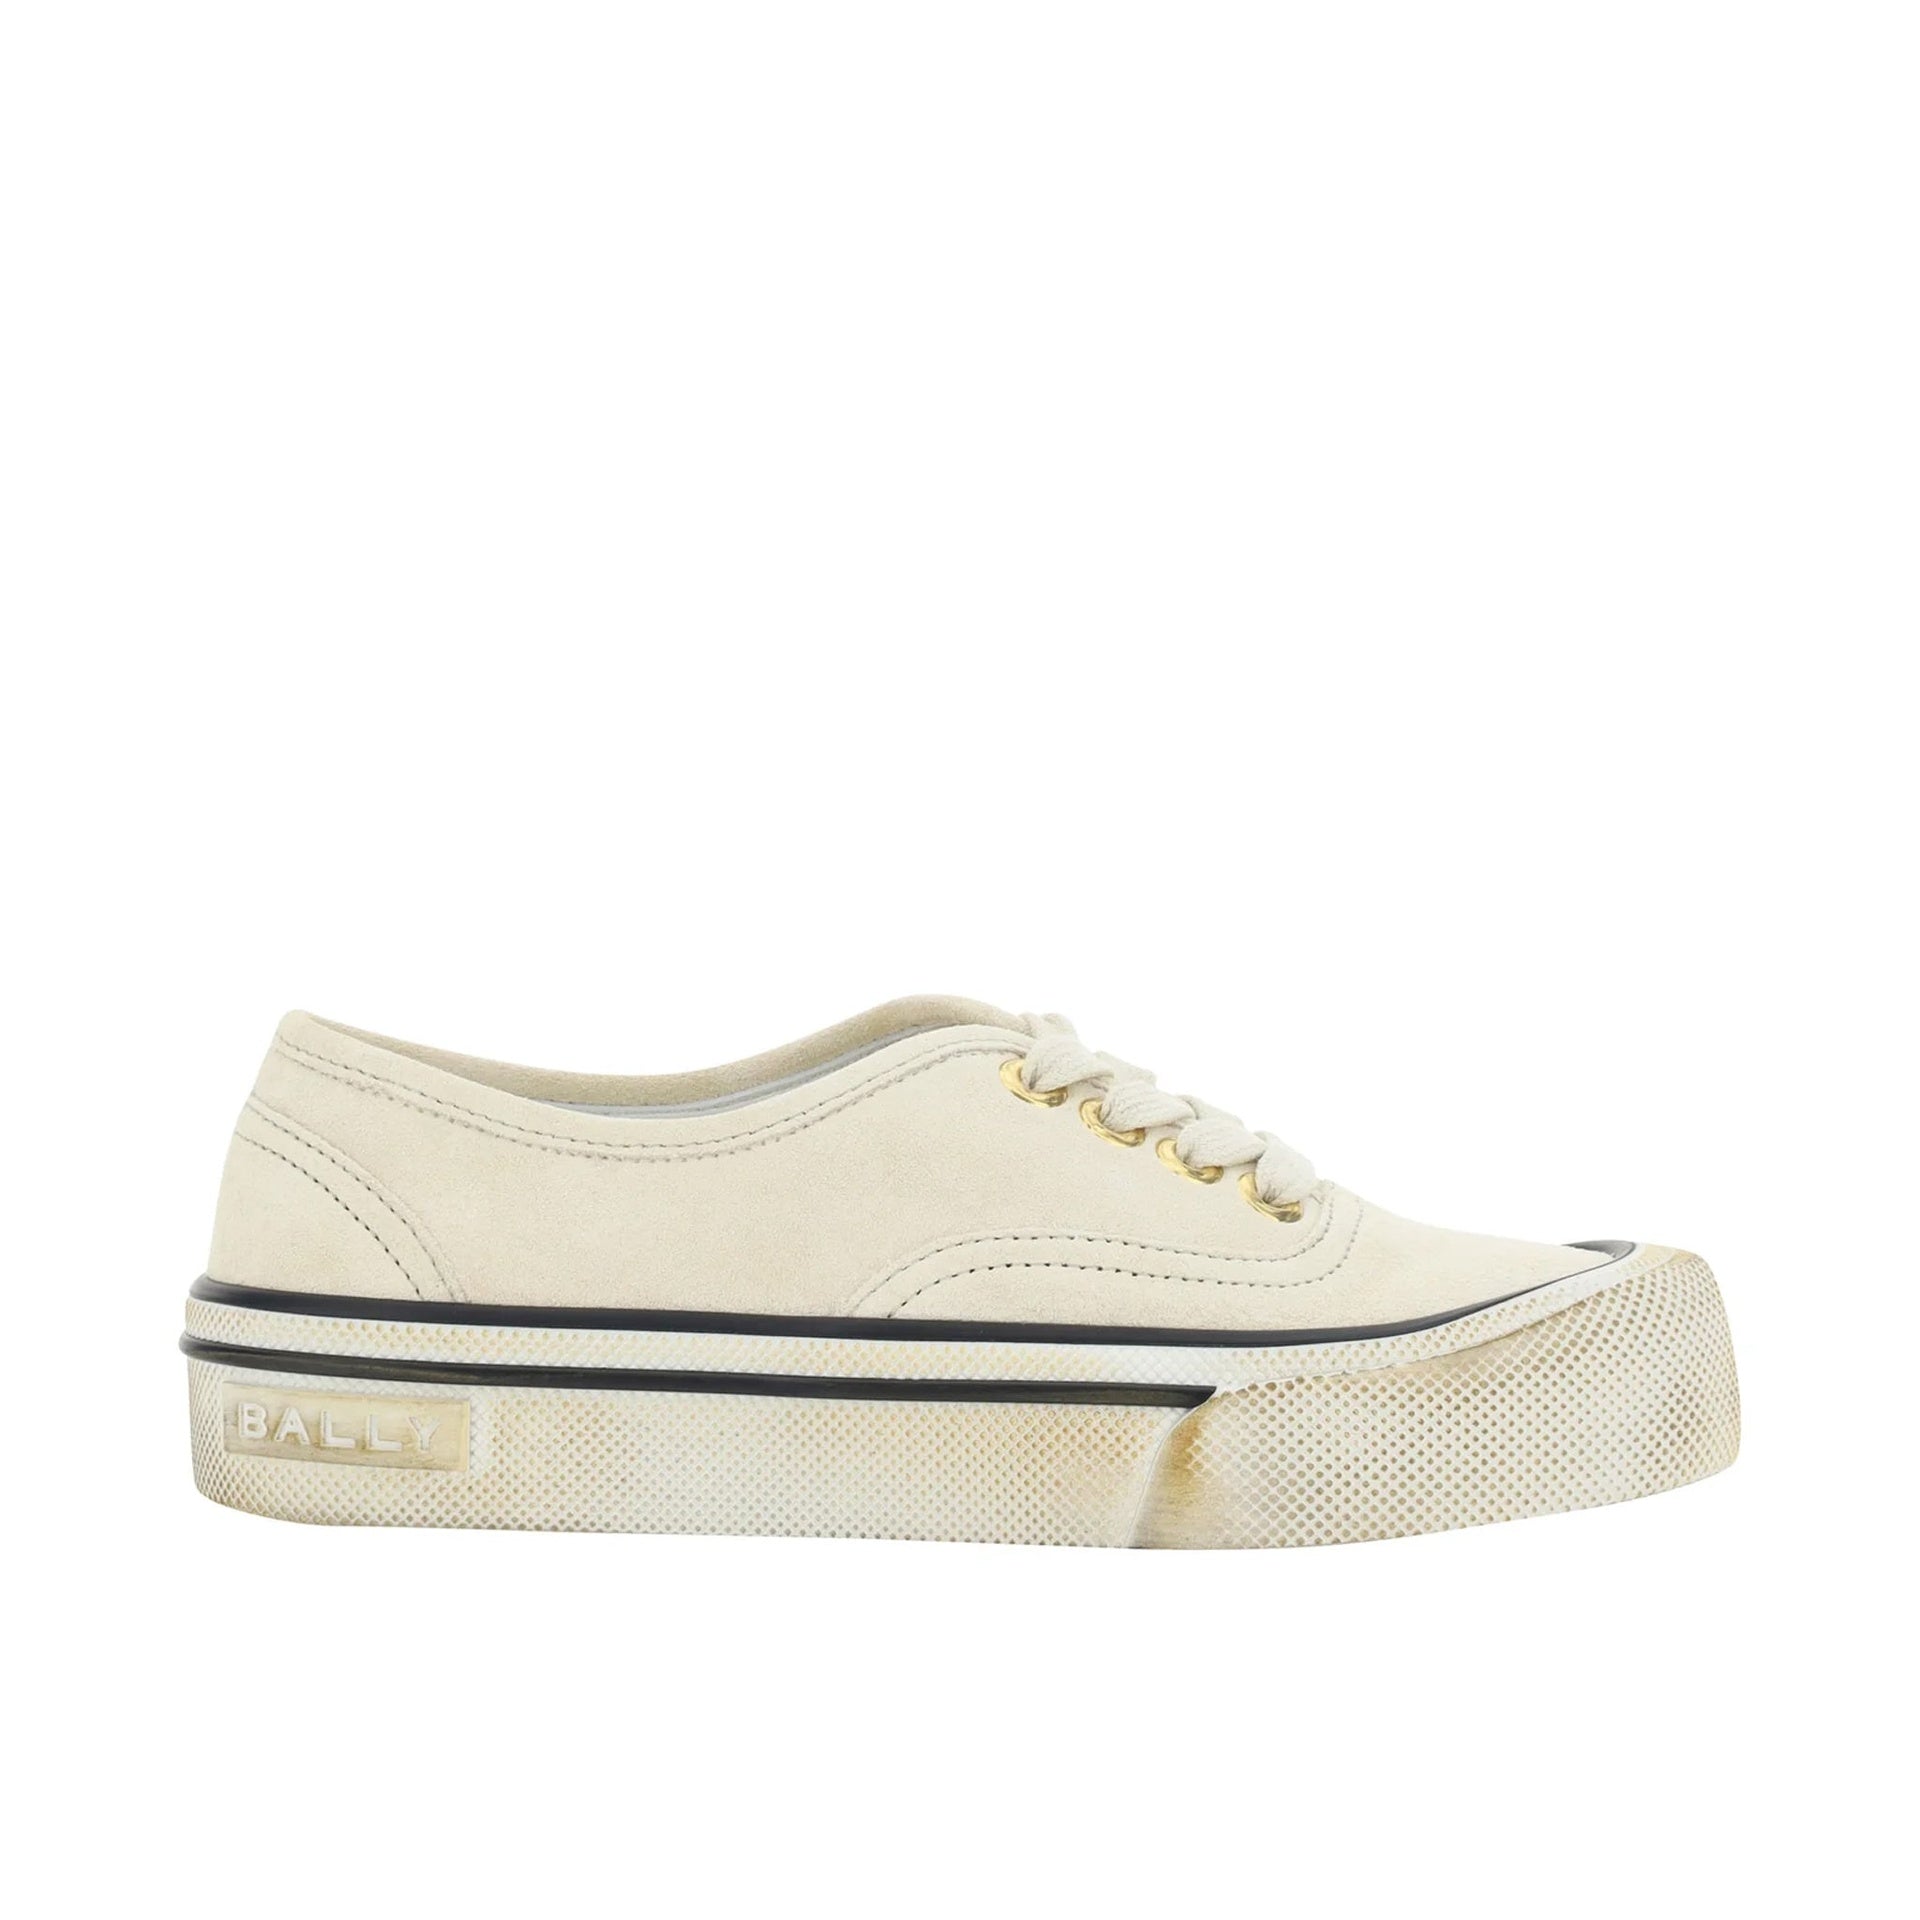 BALLY-OUTLET-SALE-Bally-Lyder-Leather-Sneakers-Sneakers-WHITE-37-ARCHIVE-COLLECTION.jpg